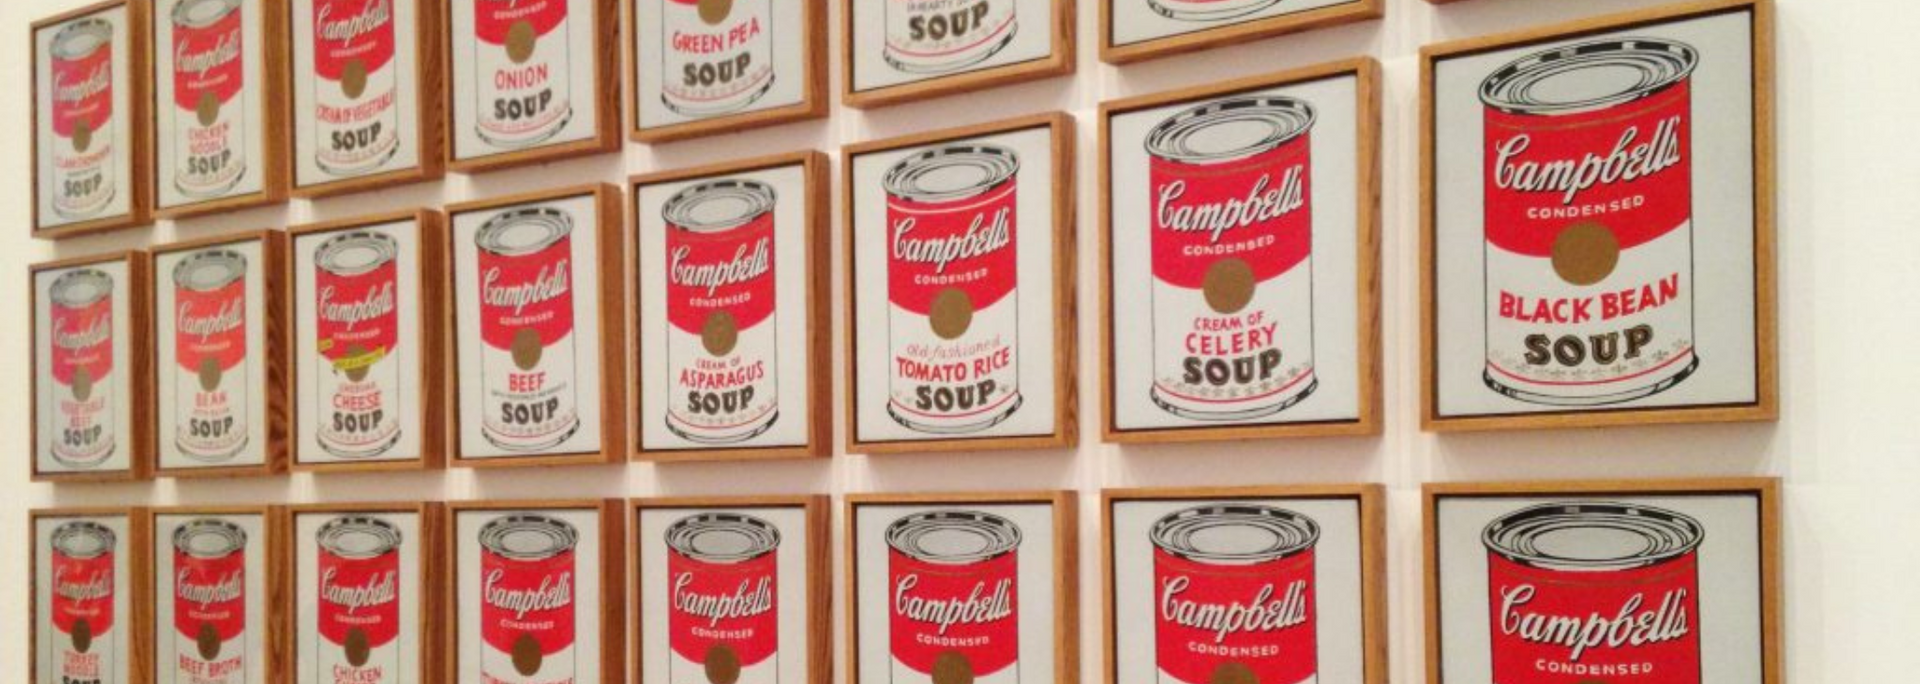 Picture of Campbell's soup tins.
